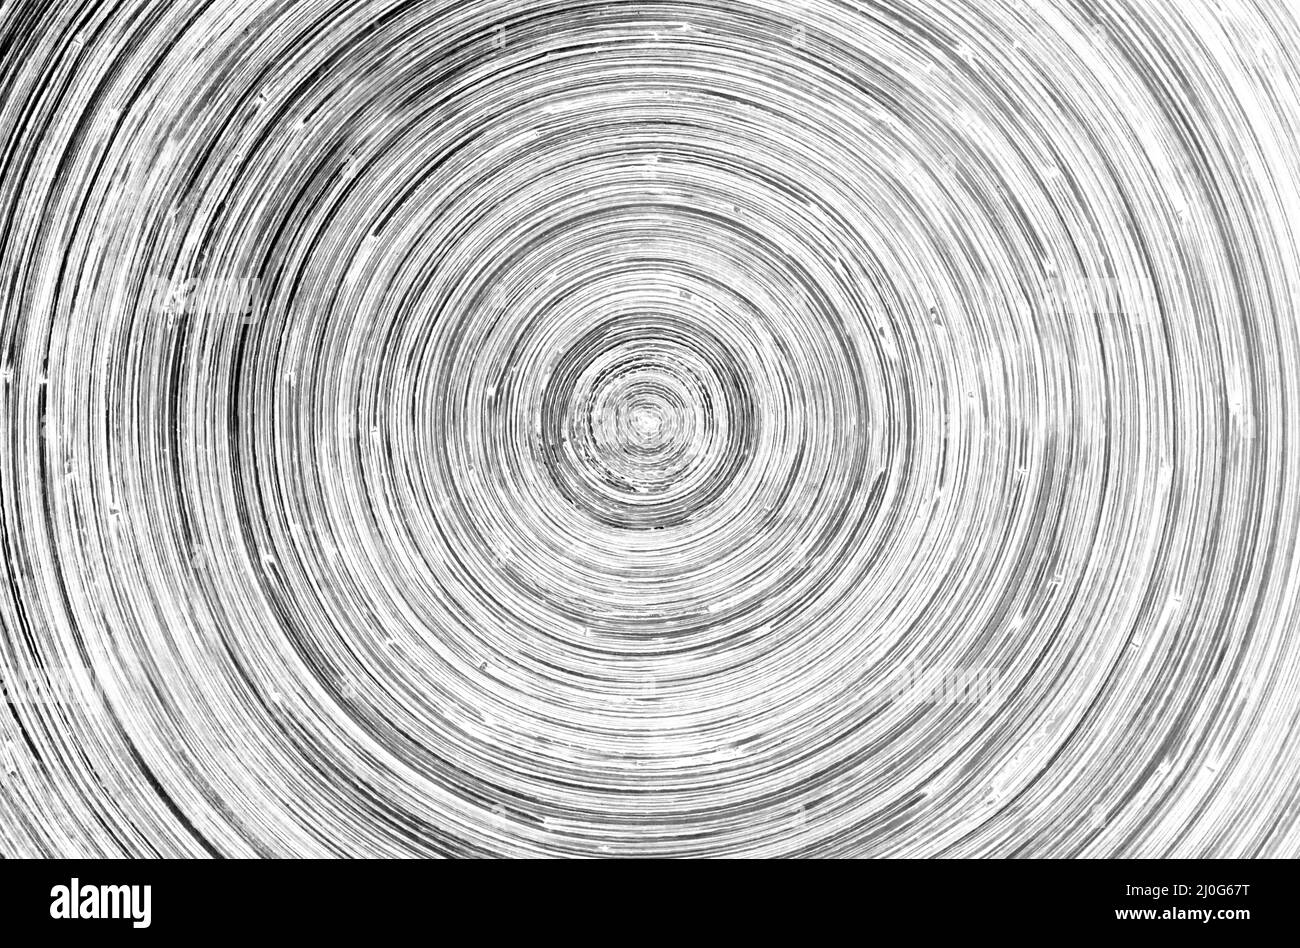 Abstract concentric circles pattern Stock Photo